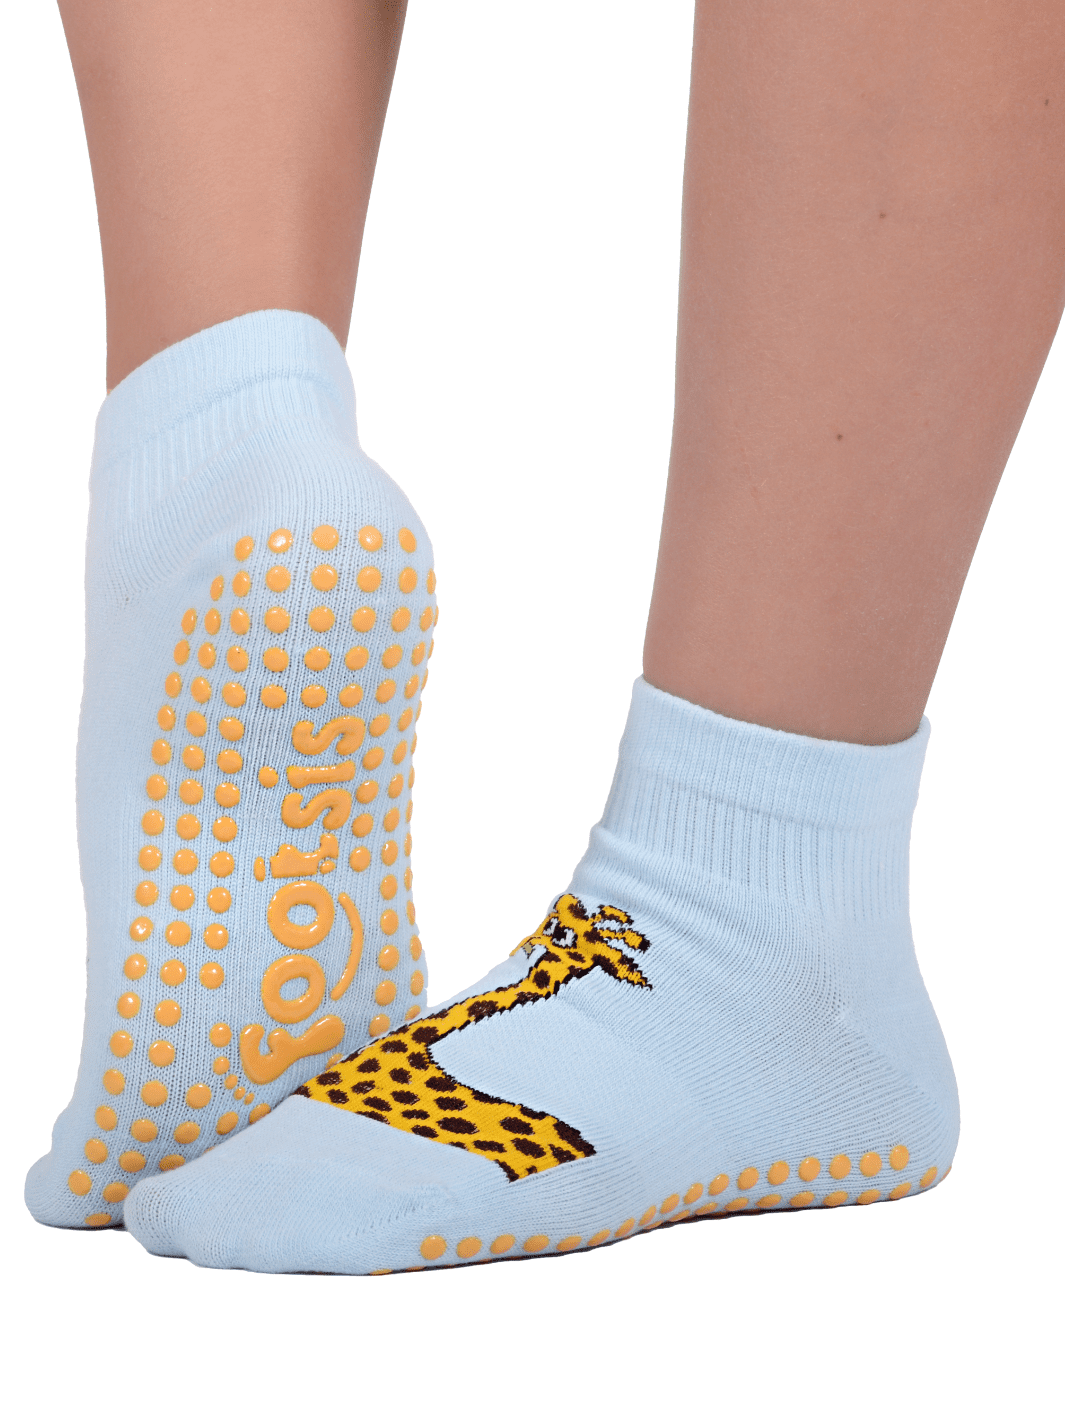  Yacht & Smith Women's Non Slip No-Skid Socks with Grips, 97%  Cotton, For Hospital, Yoga, Pilates, Barre, Grippy Ankle Sock : Clothing,  Shoes & Jewelry